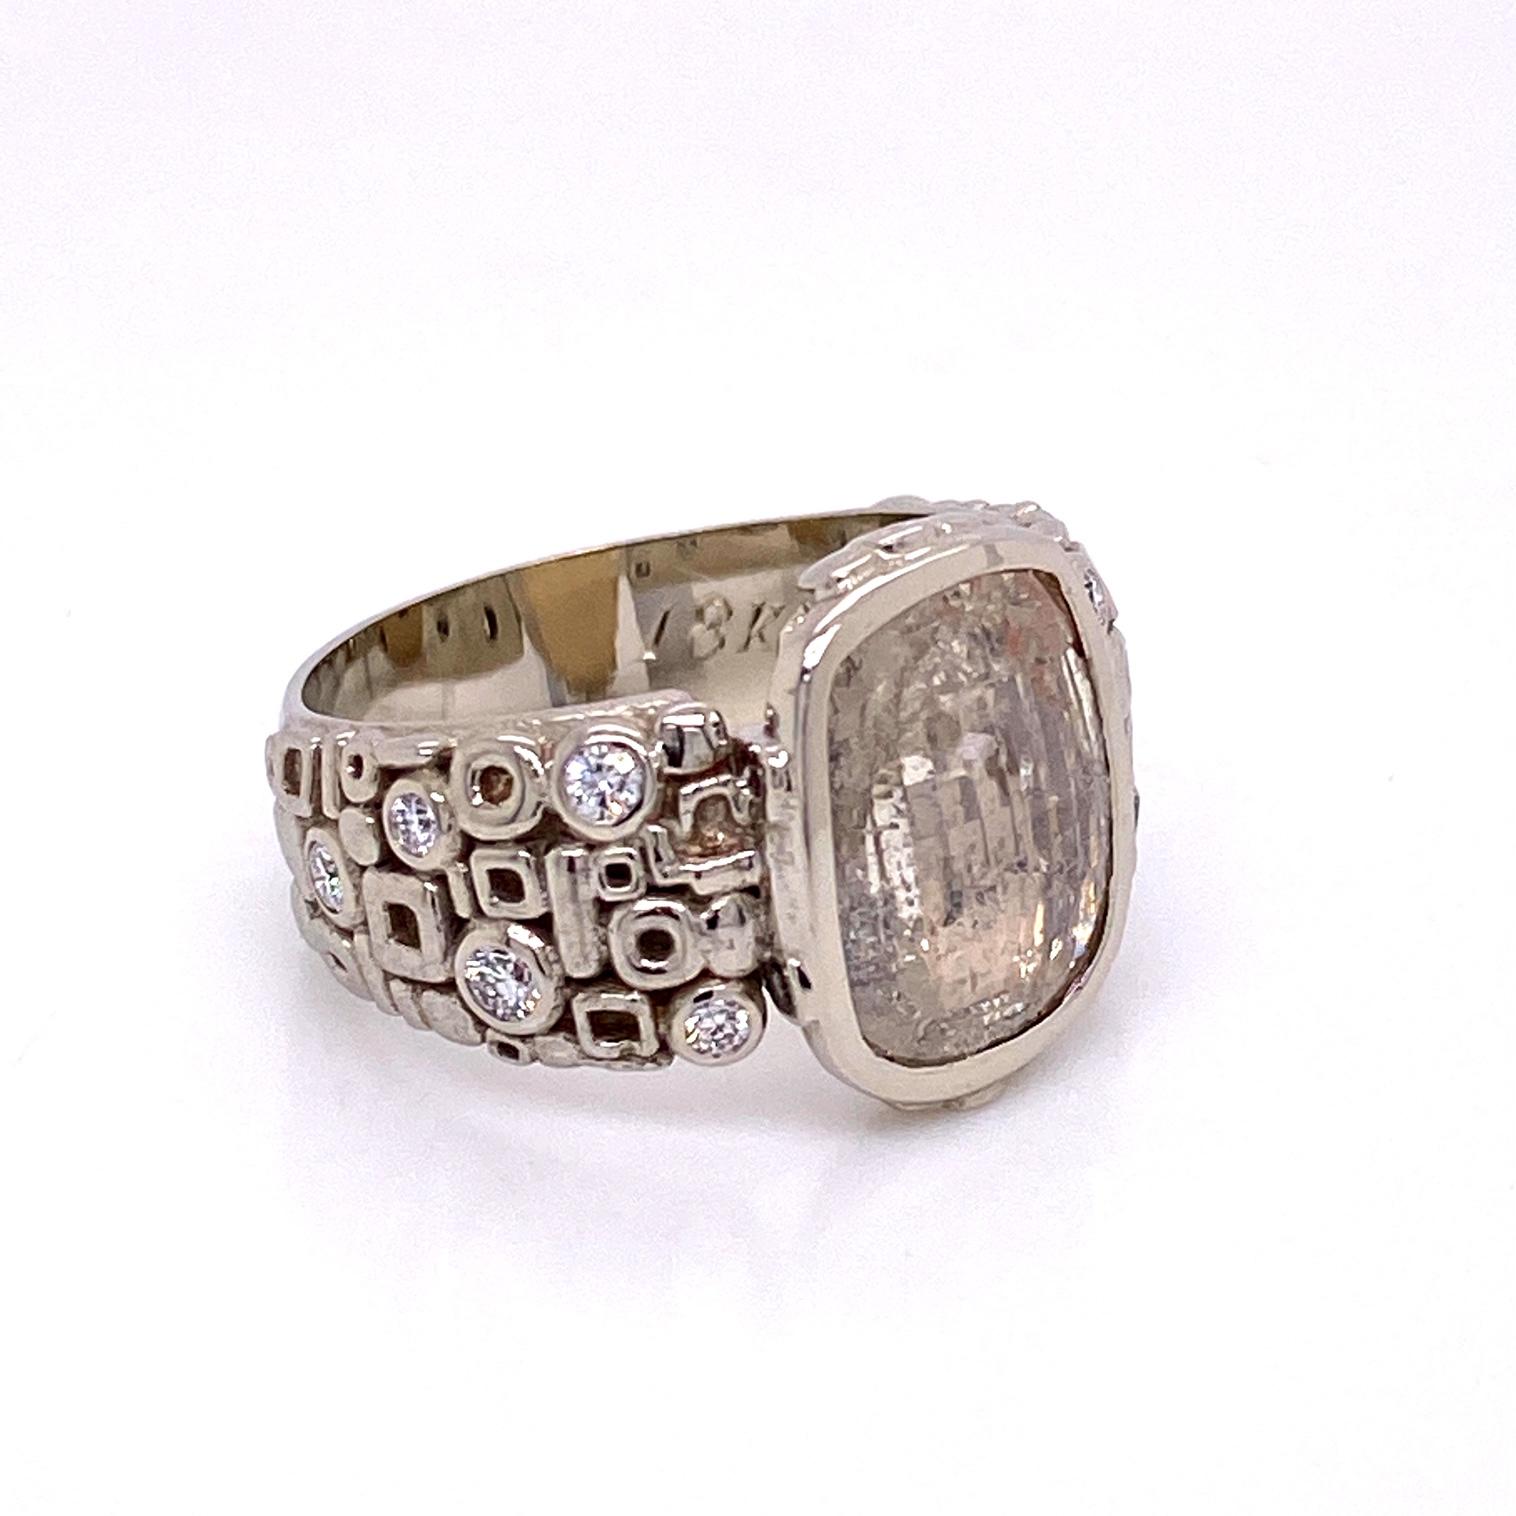 An 18k white gold geometric pattern ring set with a 2.41ct rose cut diamond and .166 total carat weight of F color VS clarity brilliant round cut diamonds. Ring size 6.25. This ring was designed and made by llyn strong.